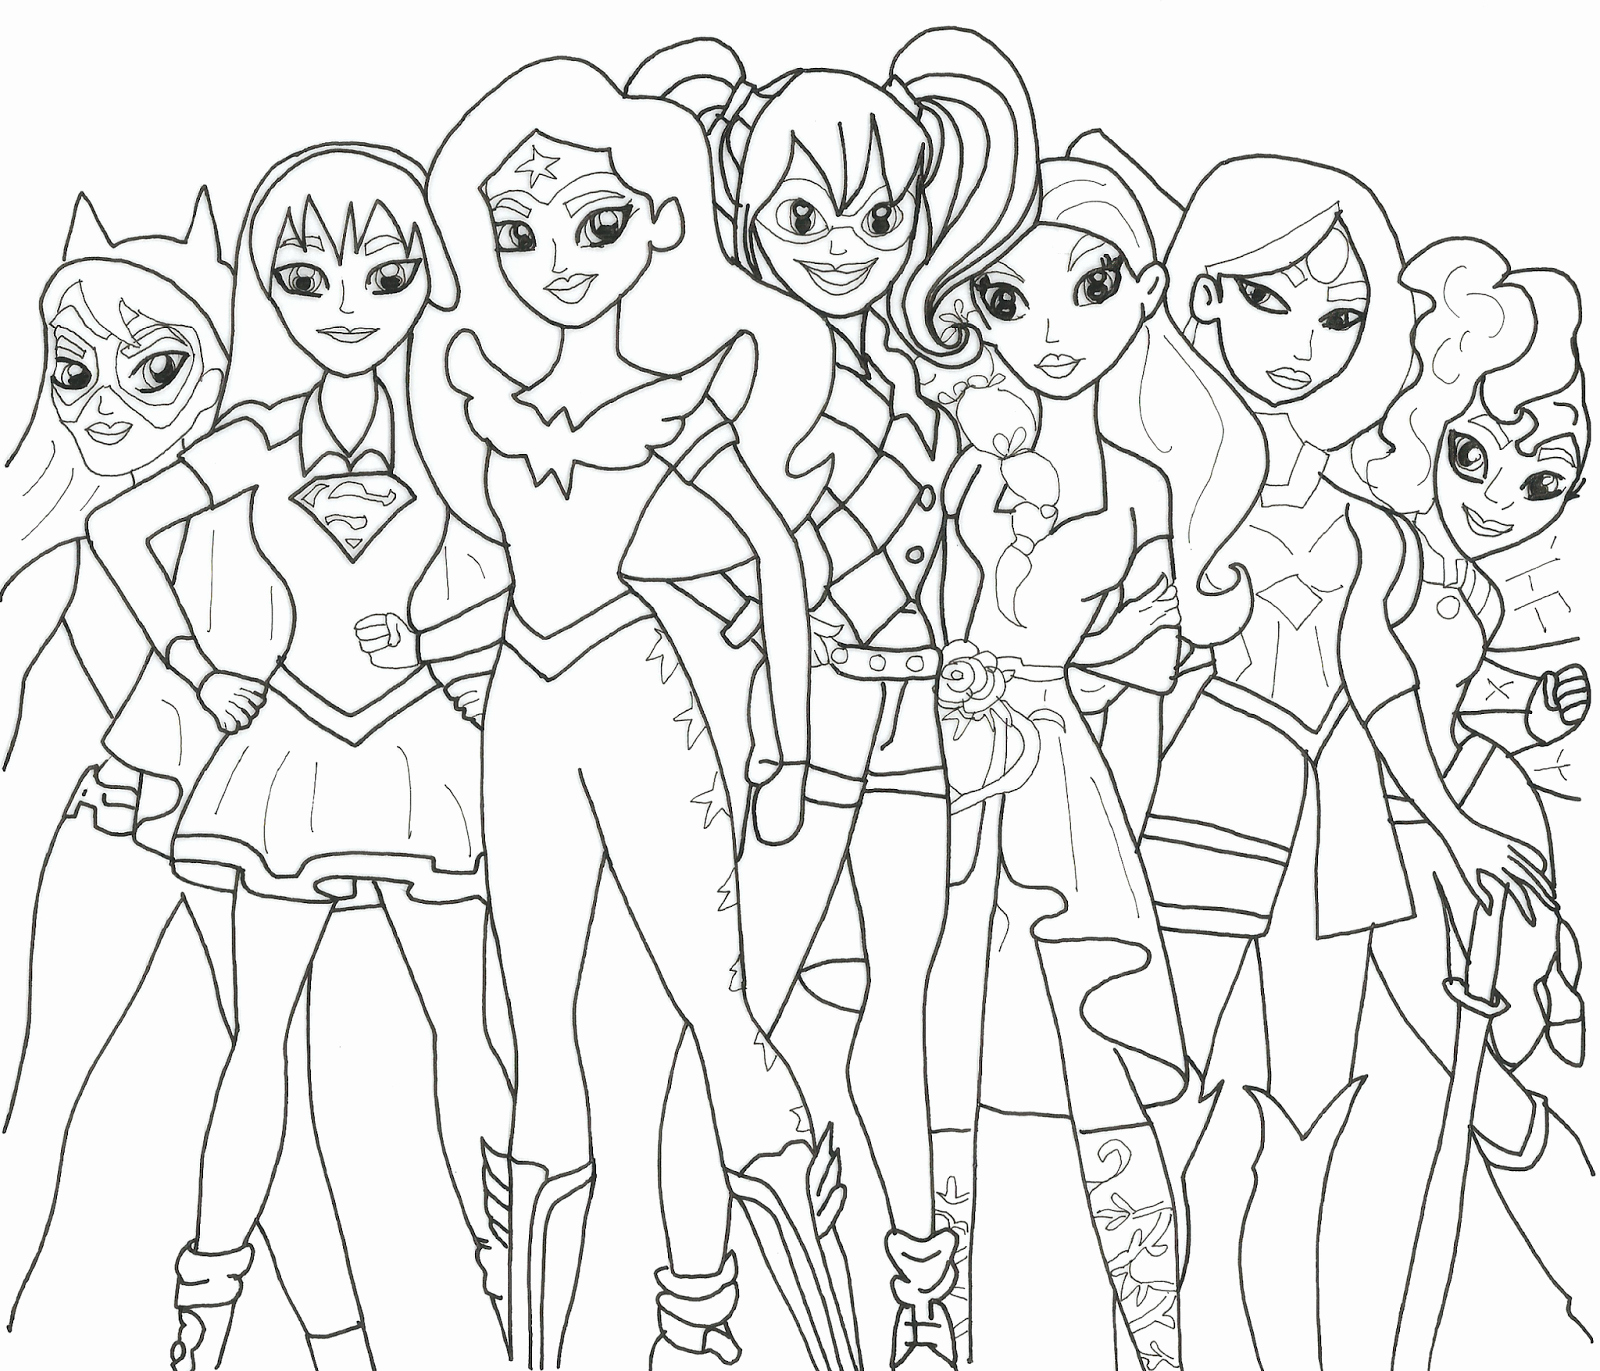 Female Superhero Coloring Pages Inspirational Pin On Other Party Ideas